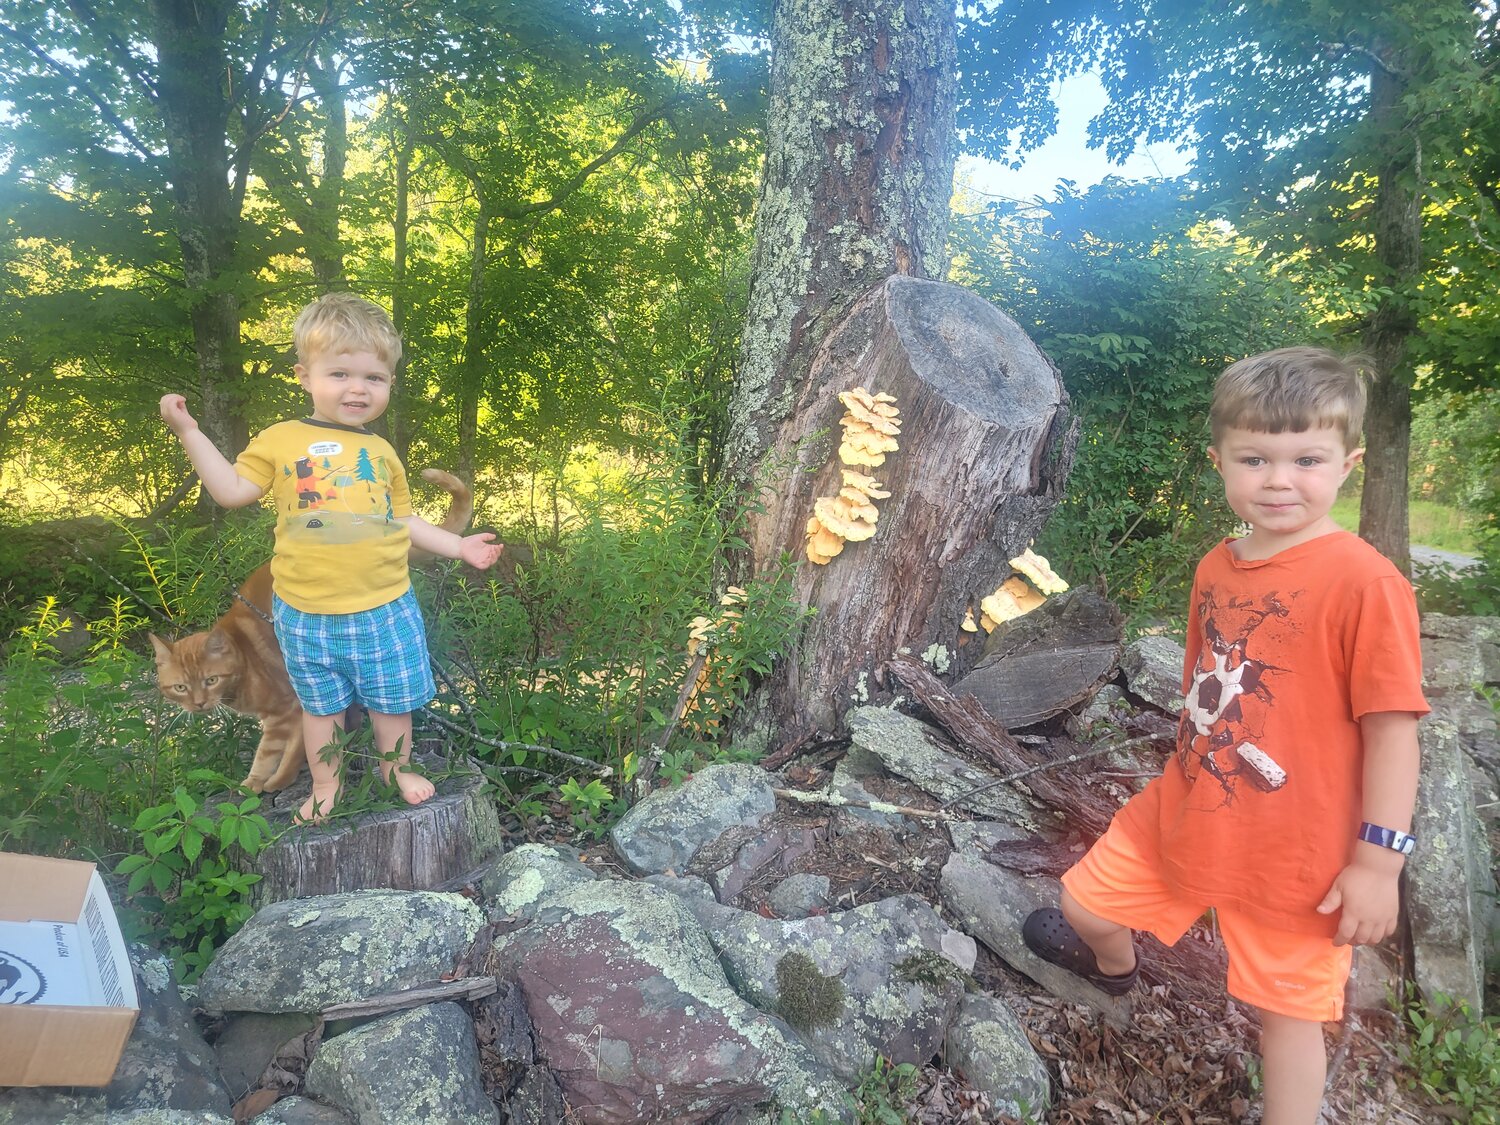 My boys enjoyed our mini-adventure and will soon taste the spoils of their success.